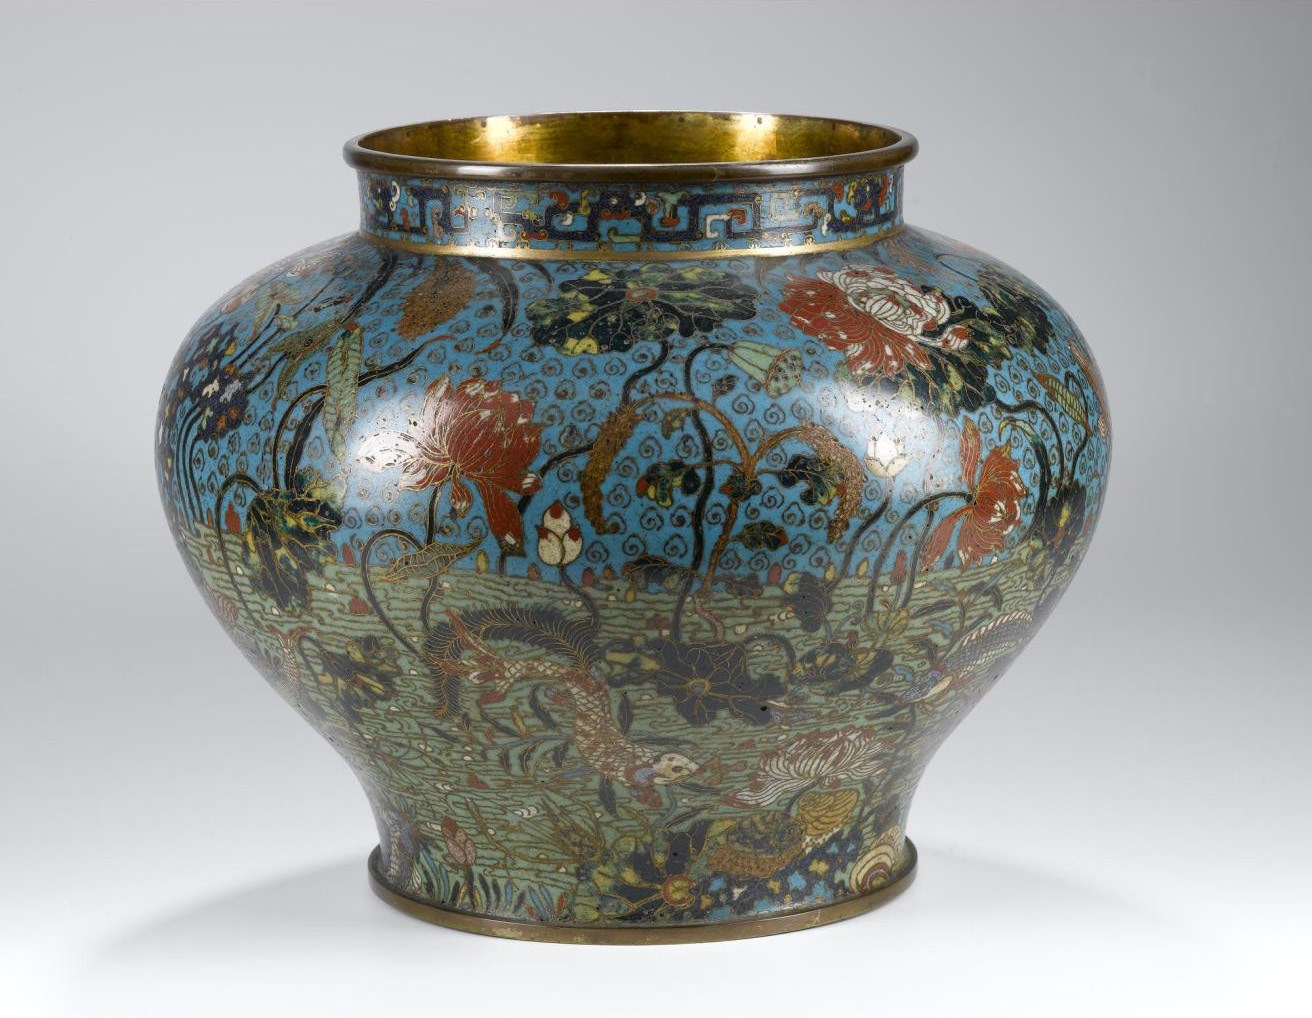 Vase of cloisonne enamel on copper, in colours with fishes among lotus and other aquatic plants, and border of interlocking dragon strapwork design round neck, probable original lid now missing: China, Ming dynasty, 16th century.